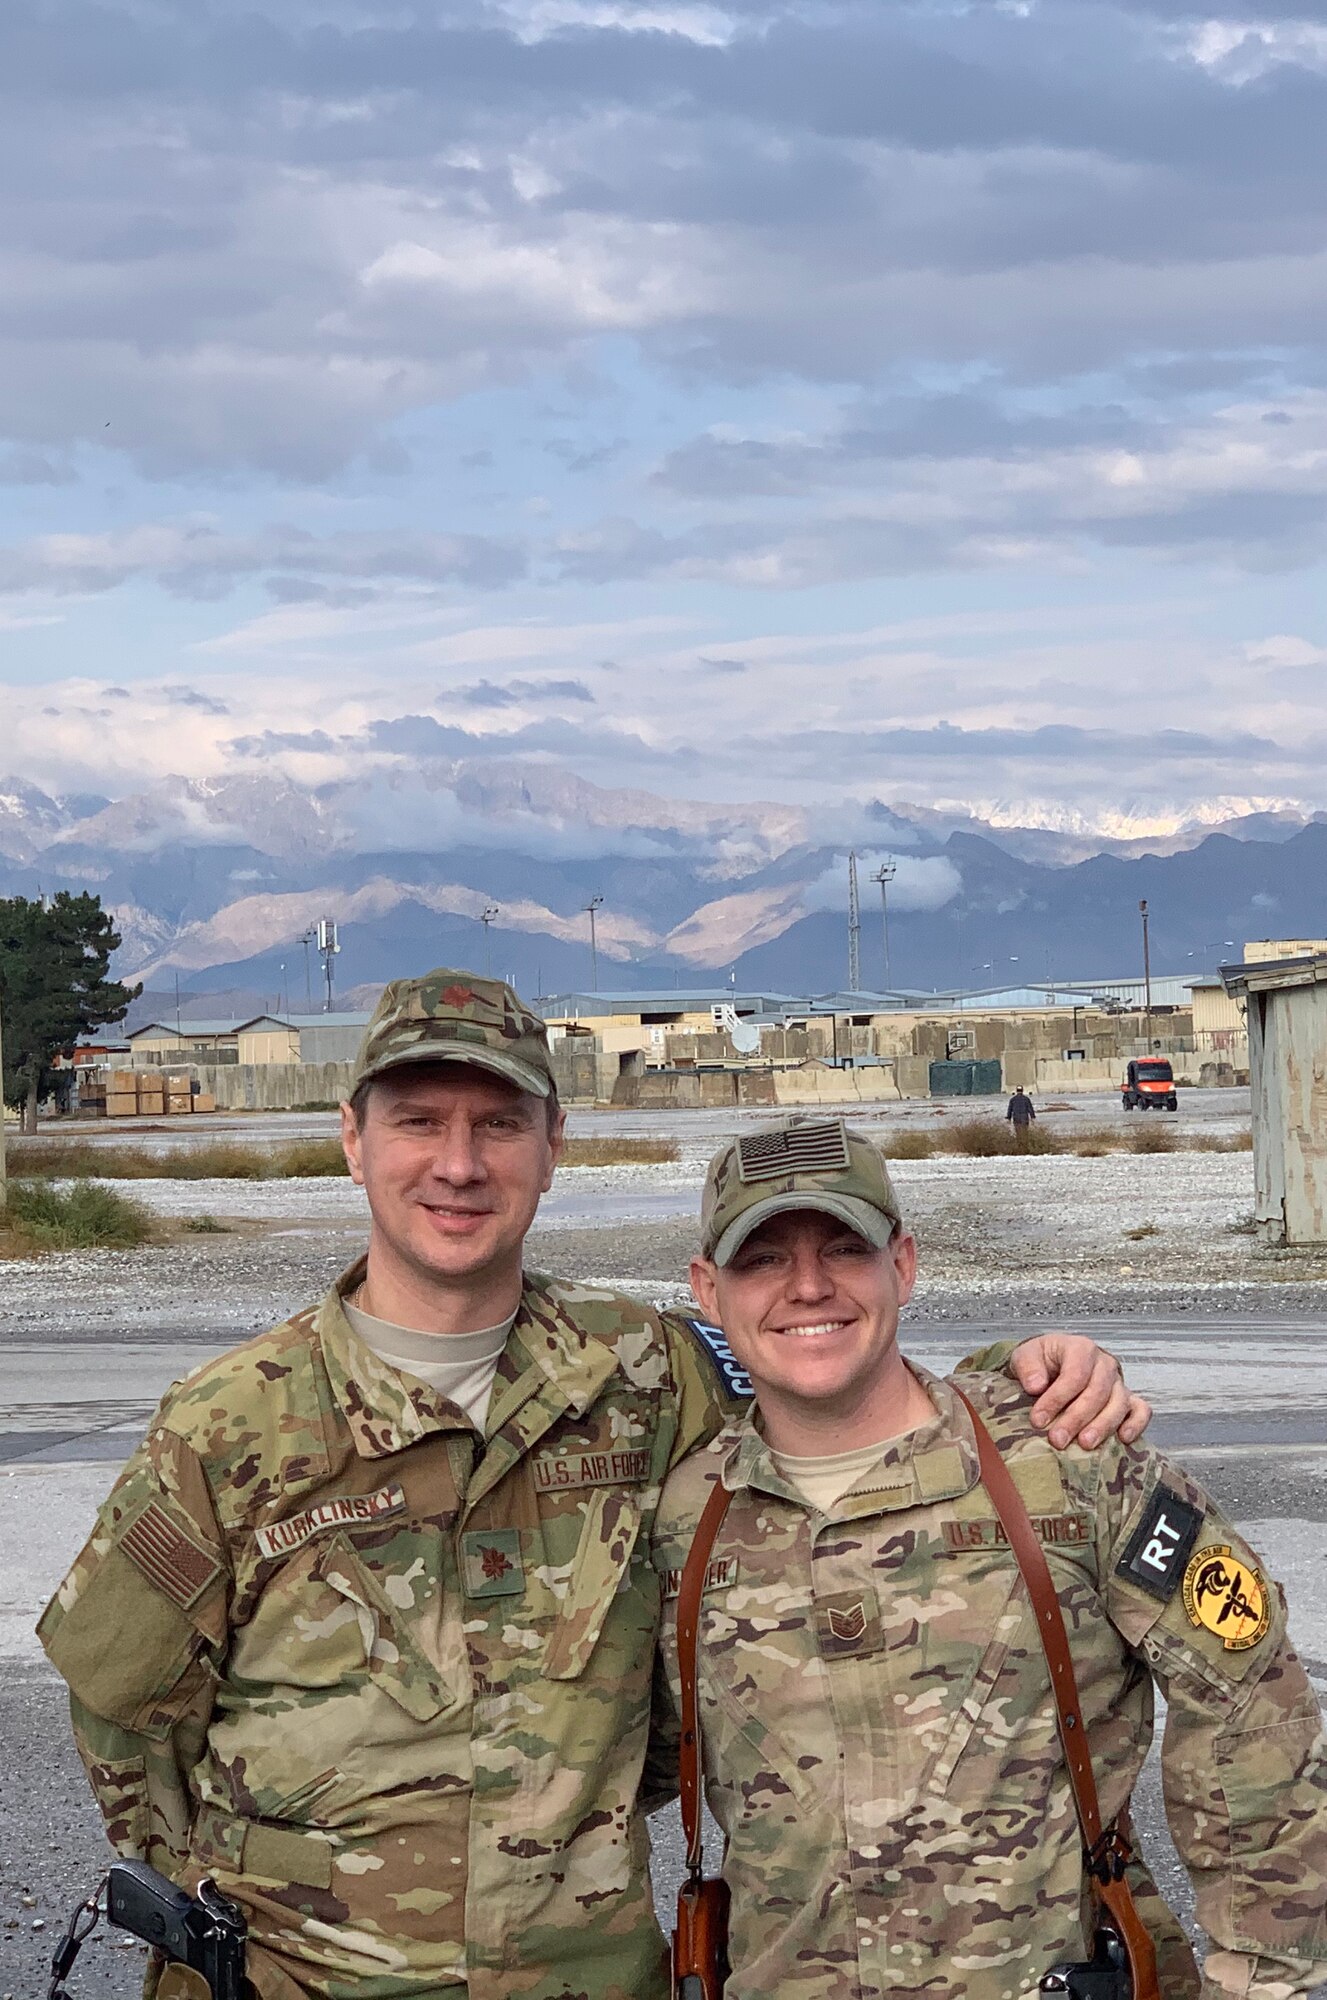 U.S. Air Force Maj. Andrew Kurklinsky, Critical Care Air Transport Team physician and officer in charge, and U.S. Air Force Tech. Sgt. Brian Schneider, CCATT respiratory therapist, pose for a photo during their six-month deployment to Bagram Airfield, Afghanistan.